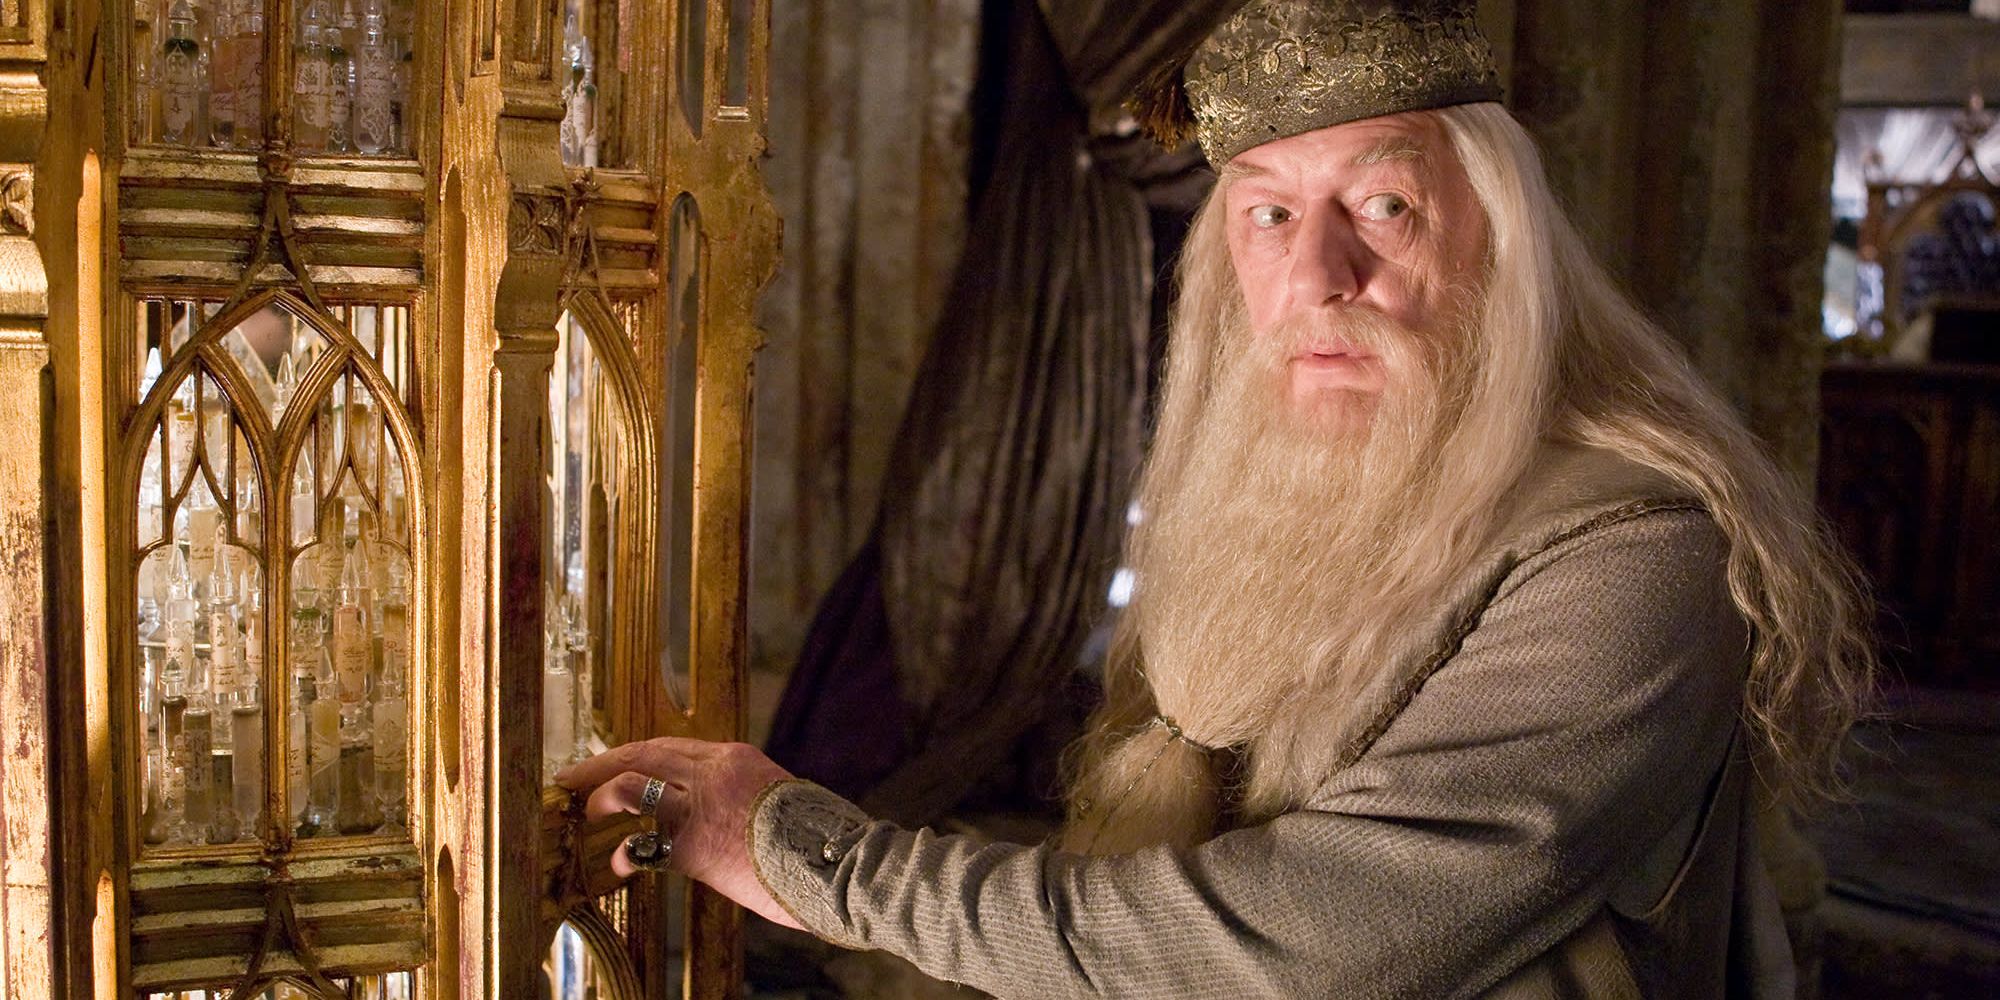 An image of Albus Dumbledore from the Harry Potter movies